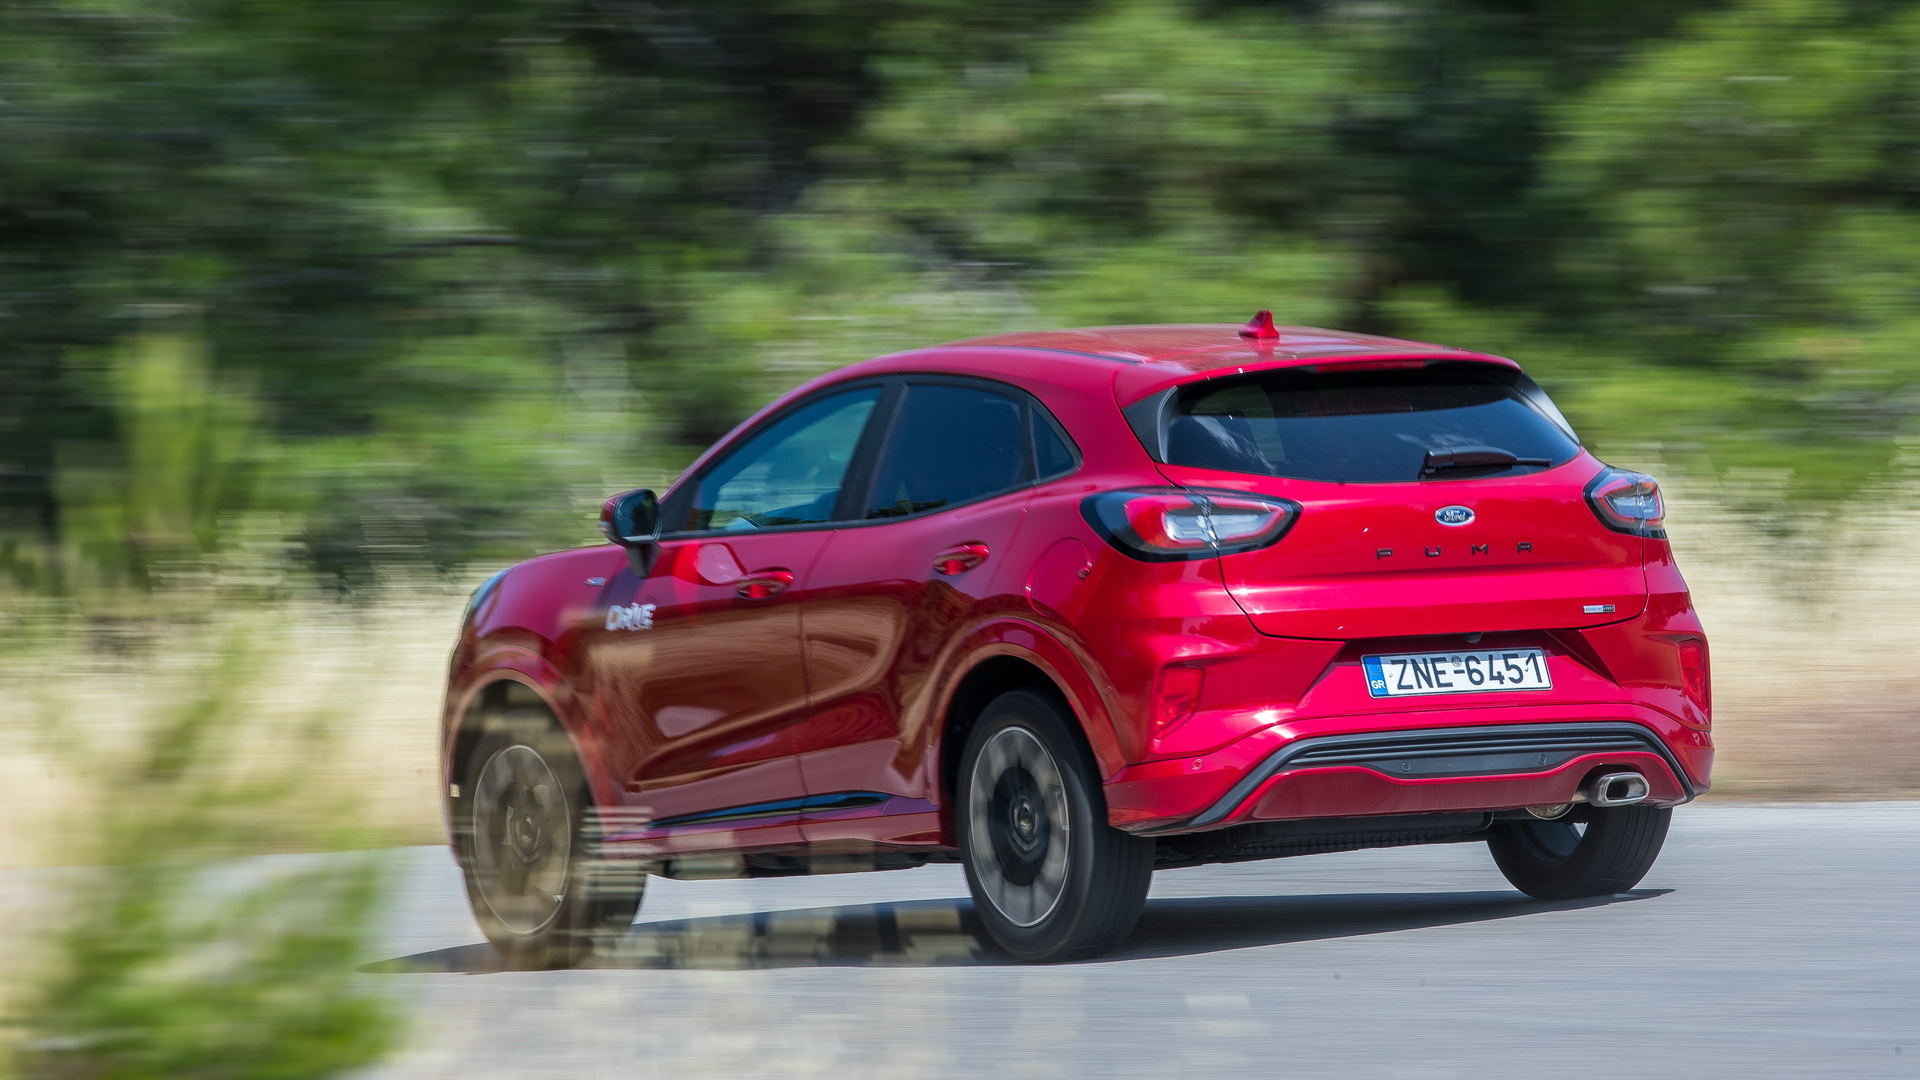 Ford Puma 1.0L EcoBoost, 155PS, mHEV Auto, Photo Credit DRIVE Media Group/Thanassis Koutsogiannis